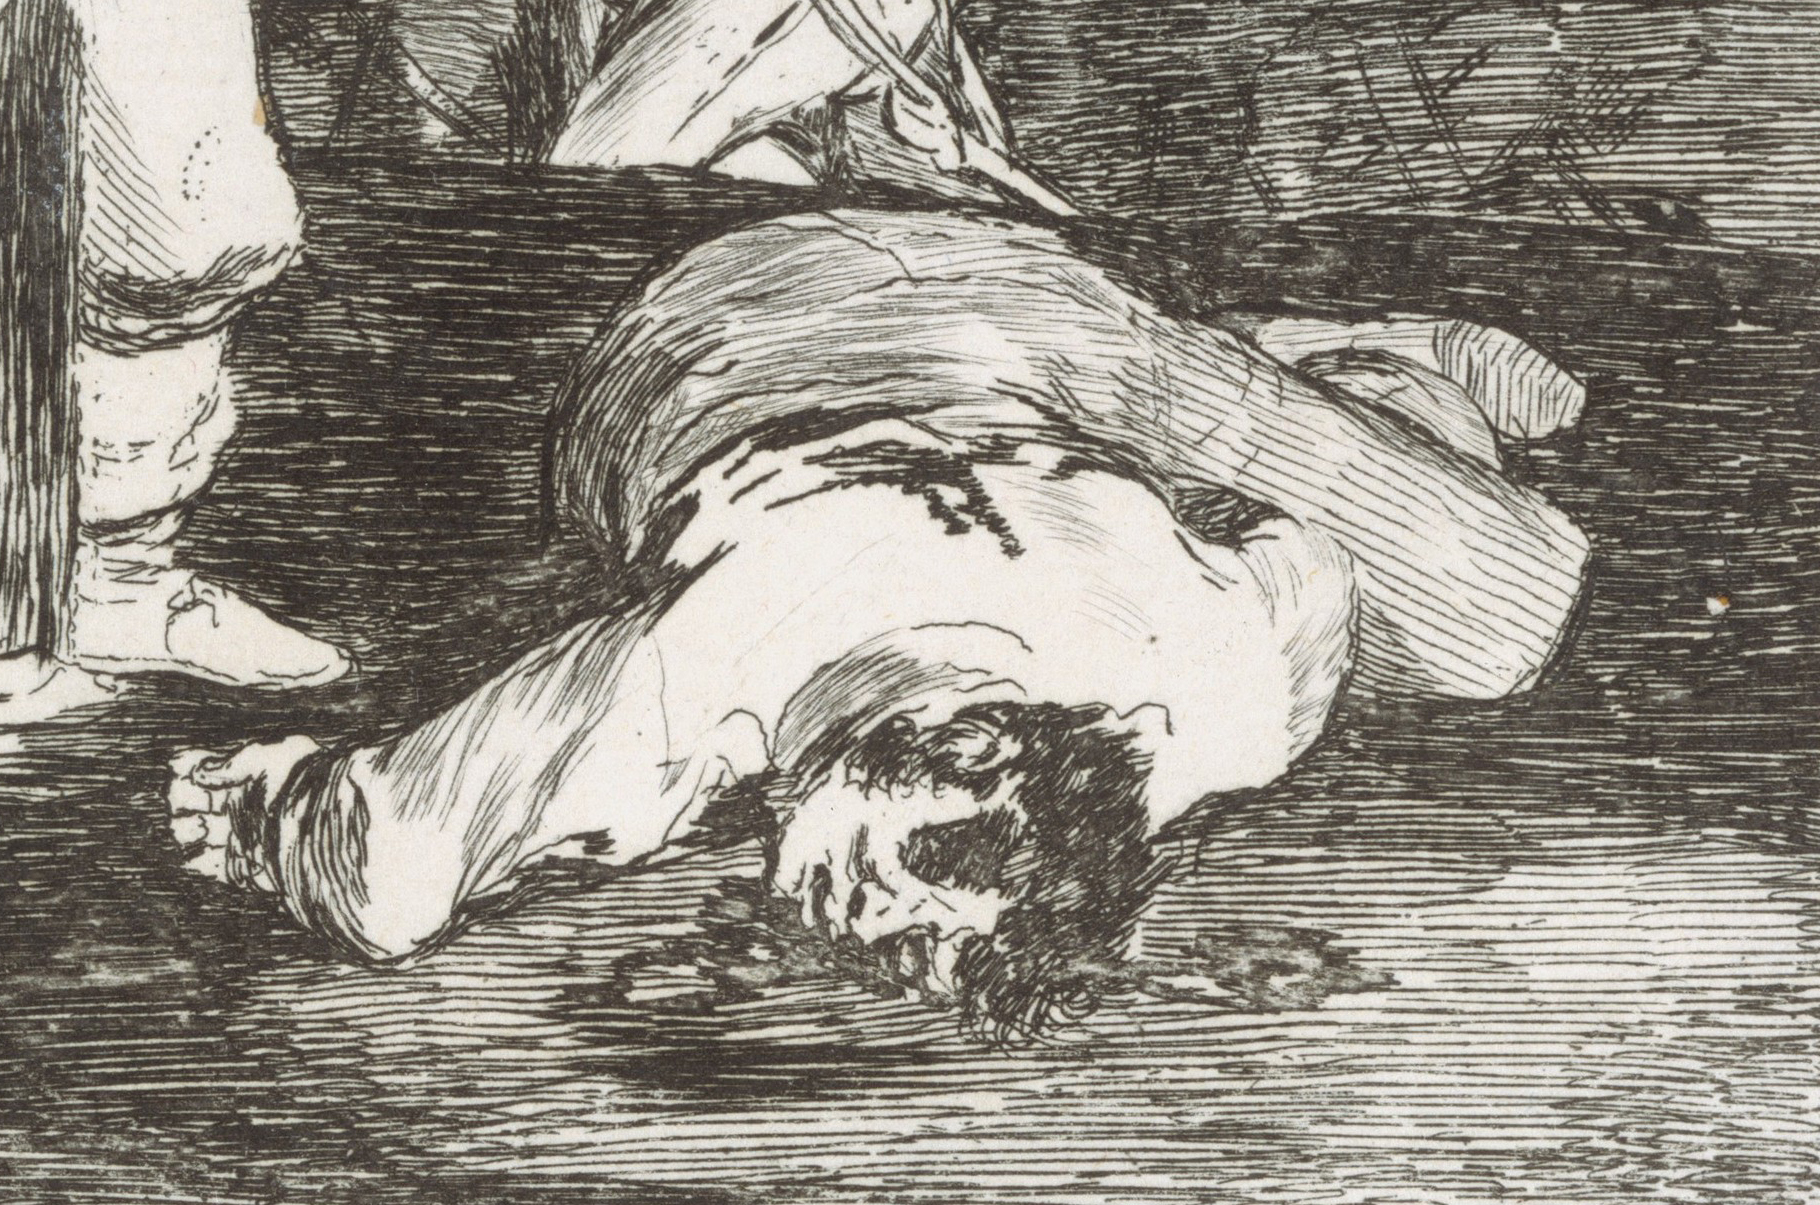 Dead figure (detail), Francisco Goya, And there's nothing to be done (Y no hai remedio), plate 15 from The Disasters of War (Los Desastres de la Guerra), 1810, etching, drypoint, burin and burnisher, 14 x 16.7 cm (The Metropolitan Museum of Art)